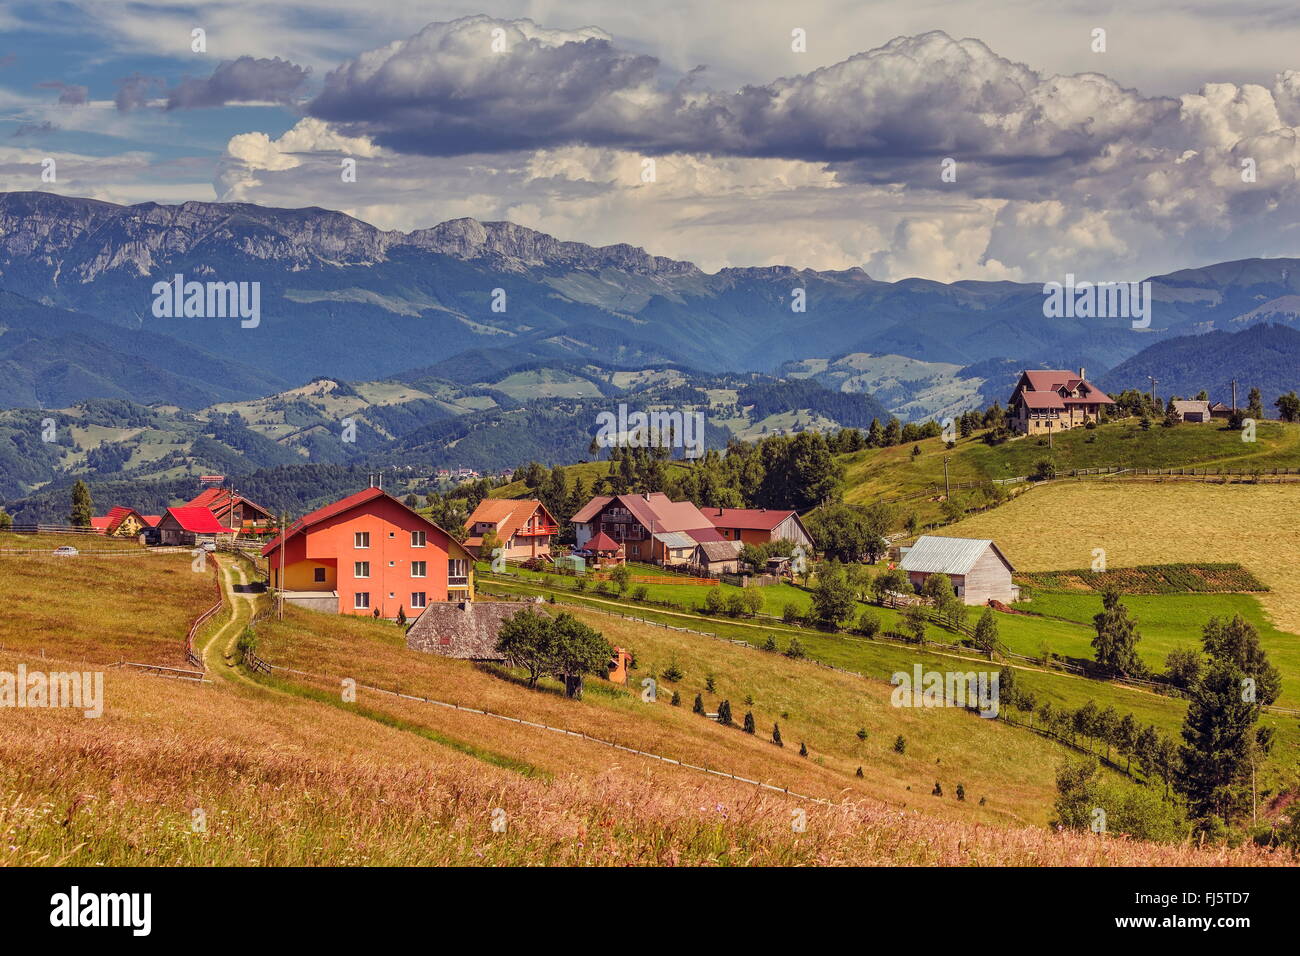 Rural mountain scenery with Romanian houses in the valleys of the Bucegi mountains, in Pestera village, Brasov county, Romania. Stock Photo